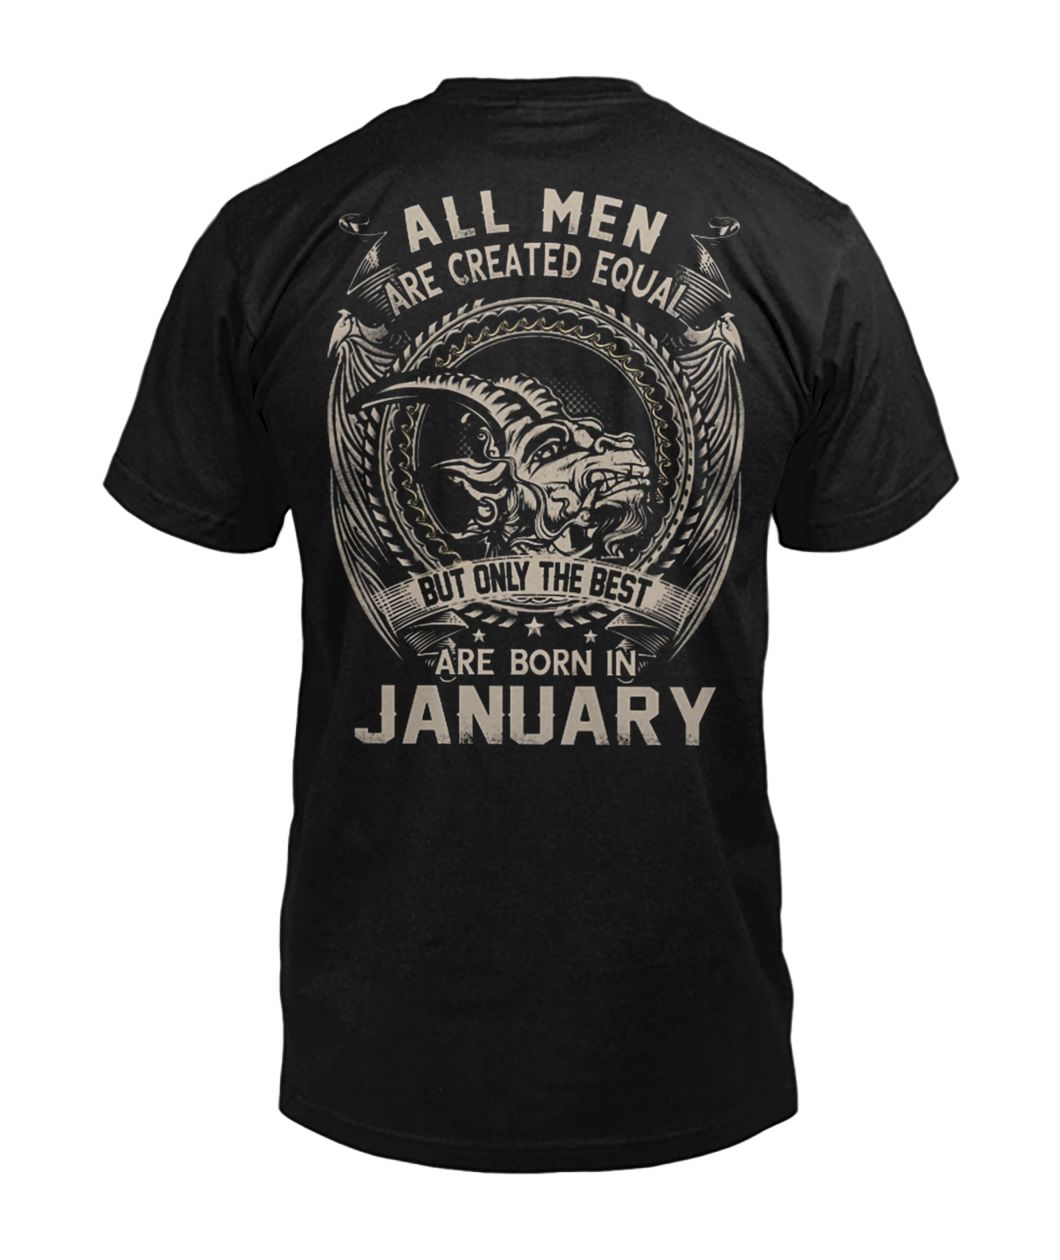 All men created equal but the best are born in january mens v-neck